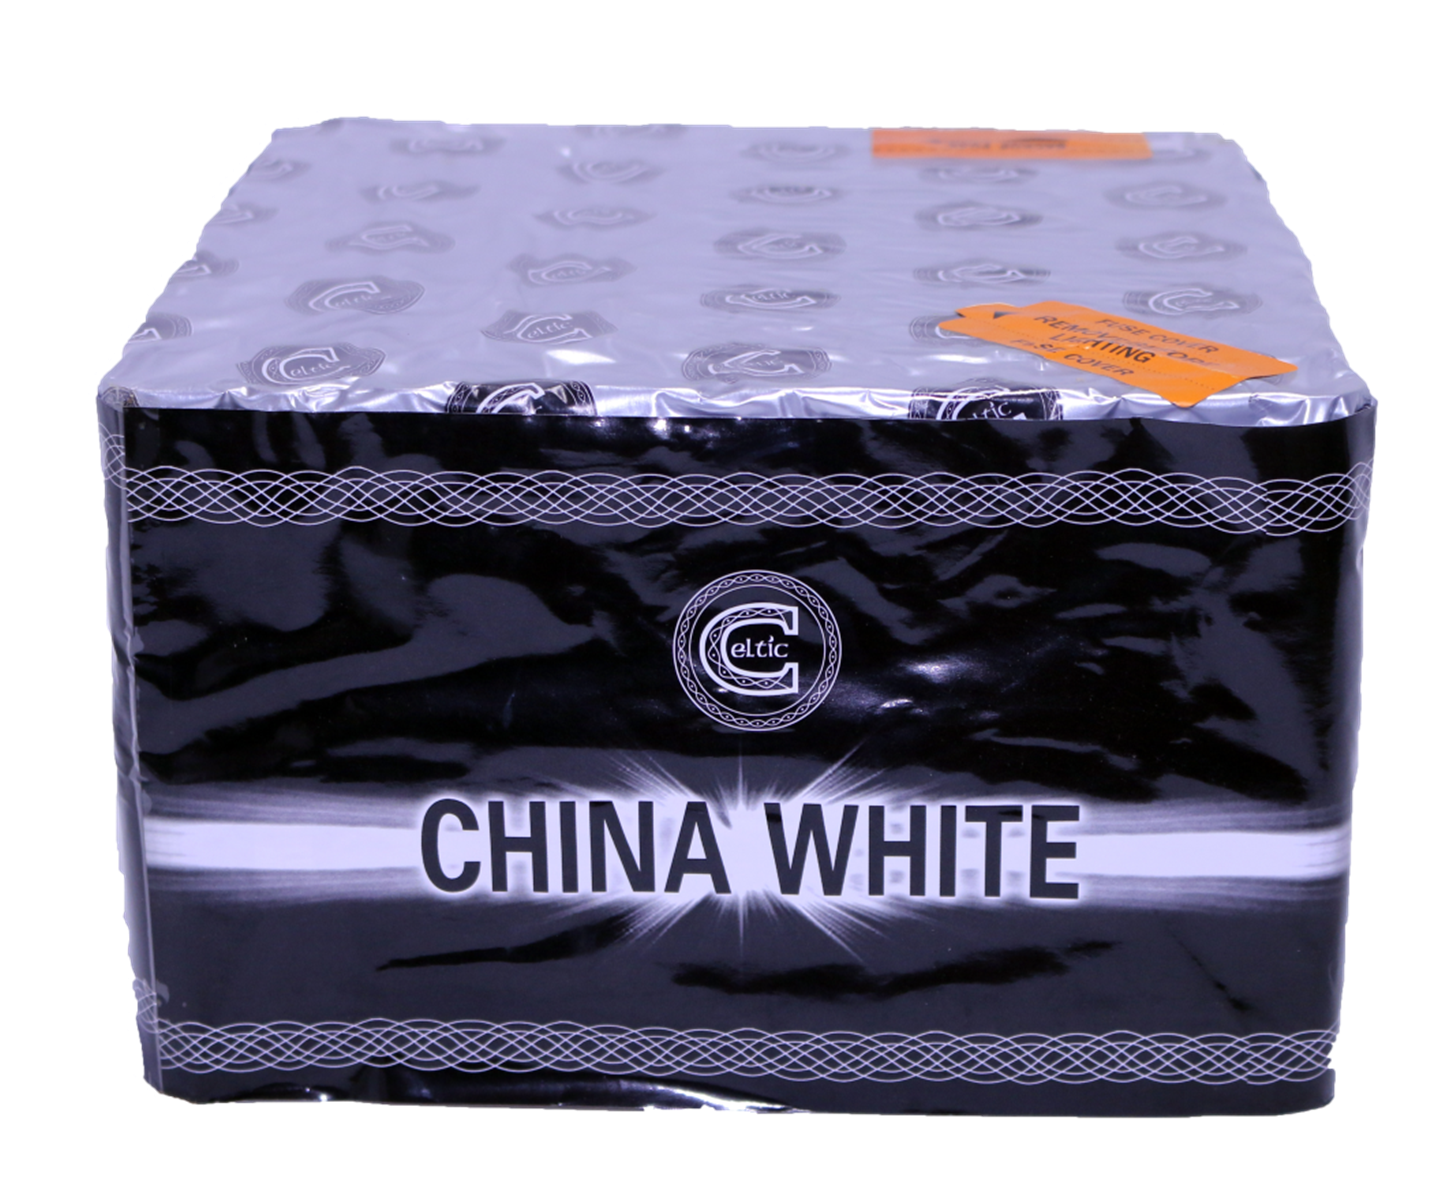 China White by Celtic Fireworks